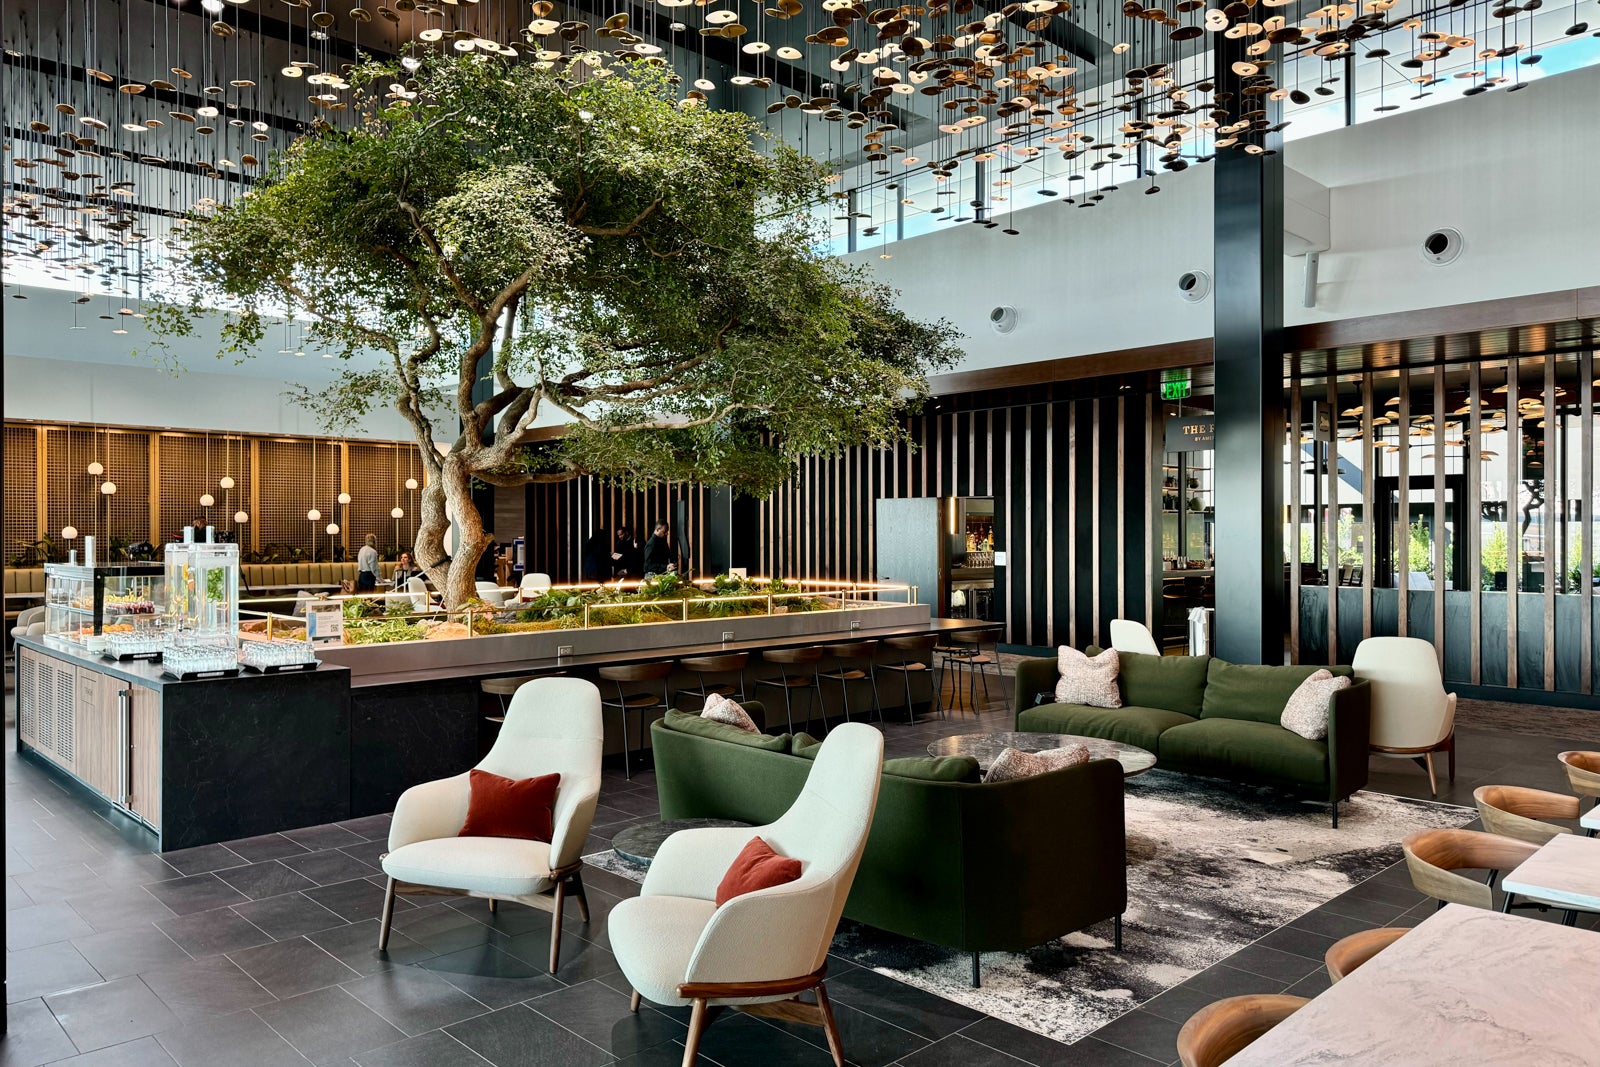 Experience Unmatched Elegance: Amex’s Newly Opened Centurion Lounge in Atlanta